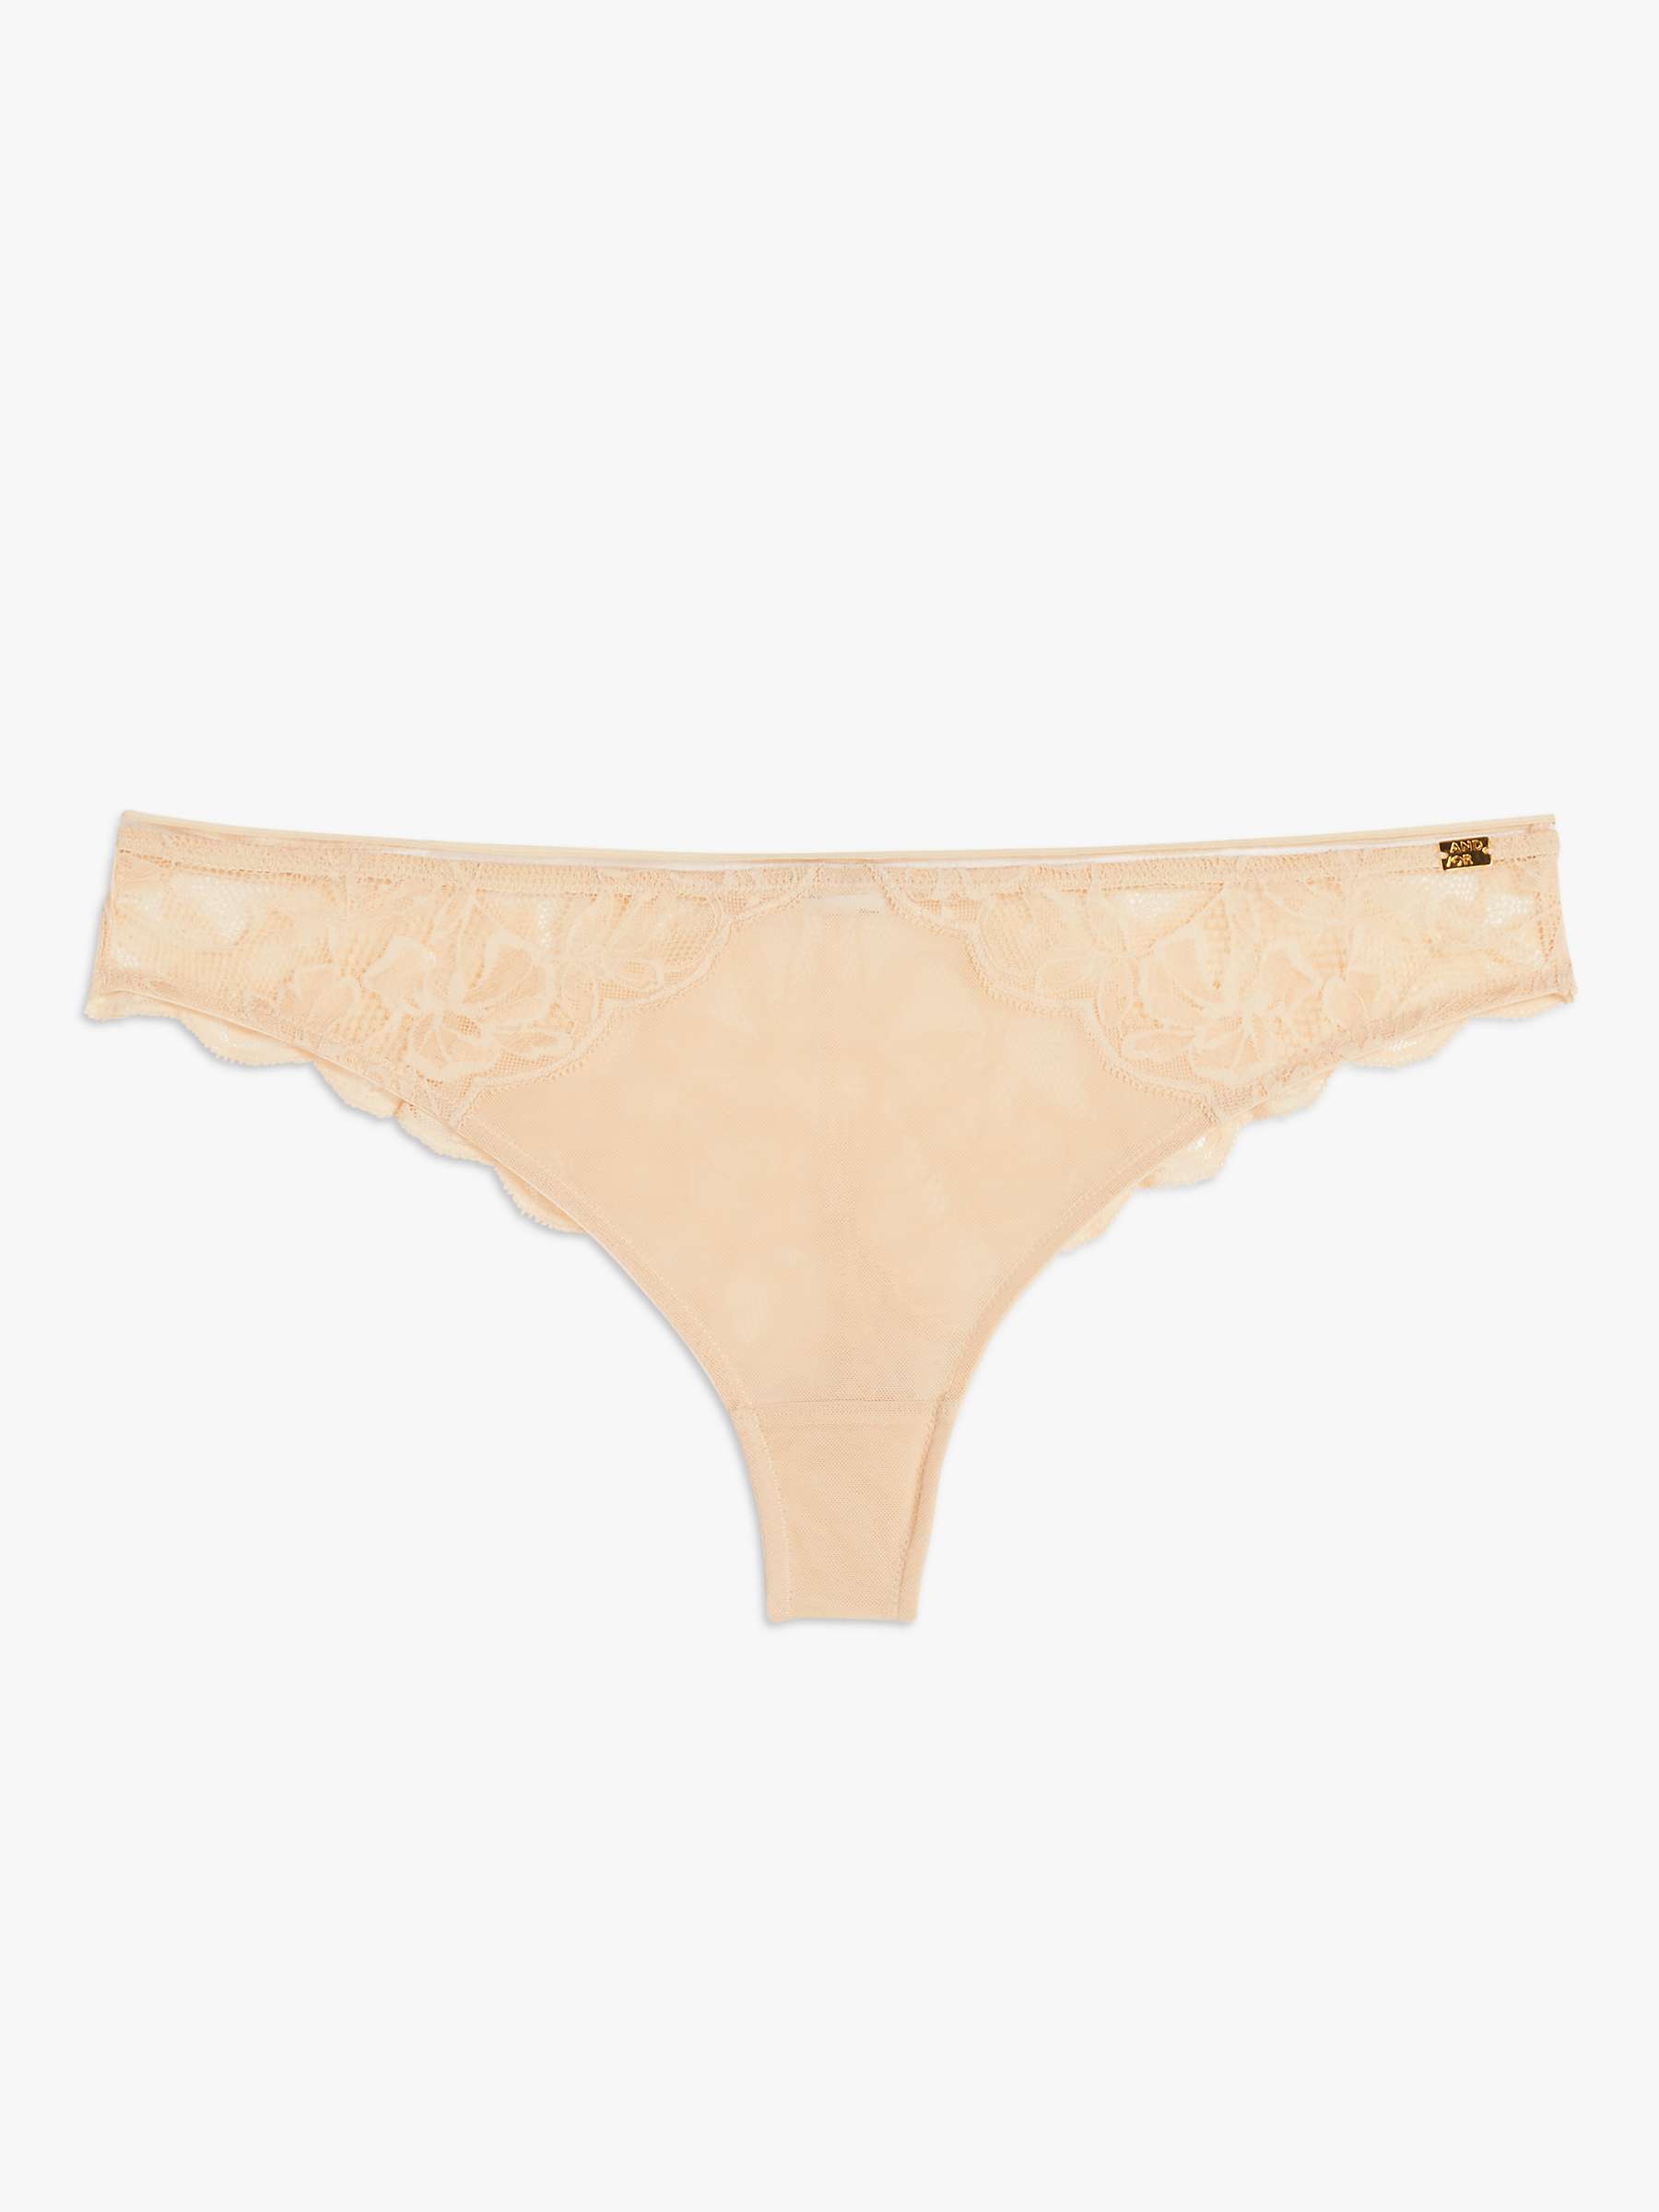 Buy AND/OR Wren Lace Brazilian Knickers Online at johnlewis.com